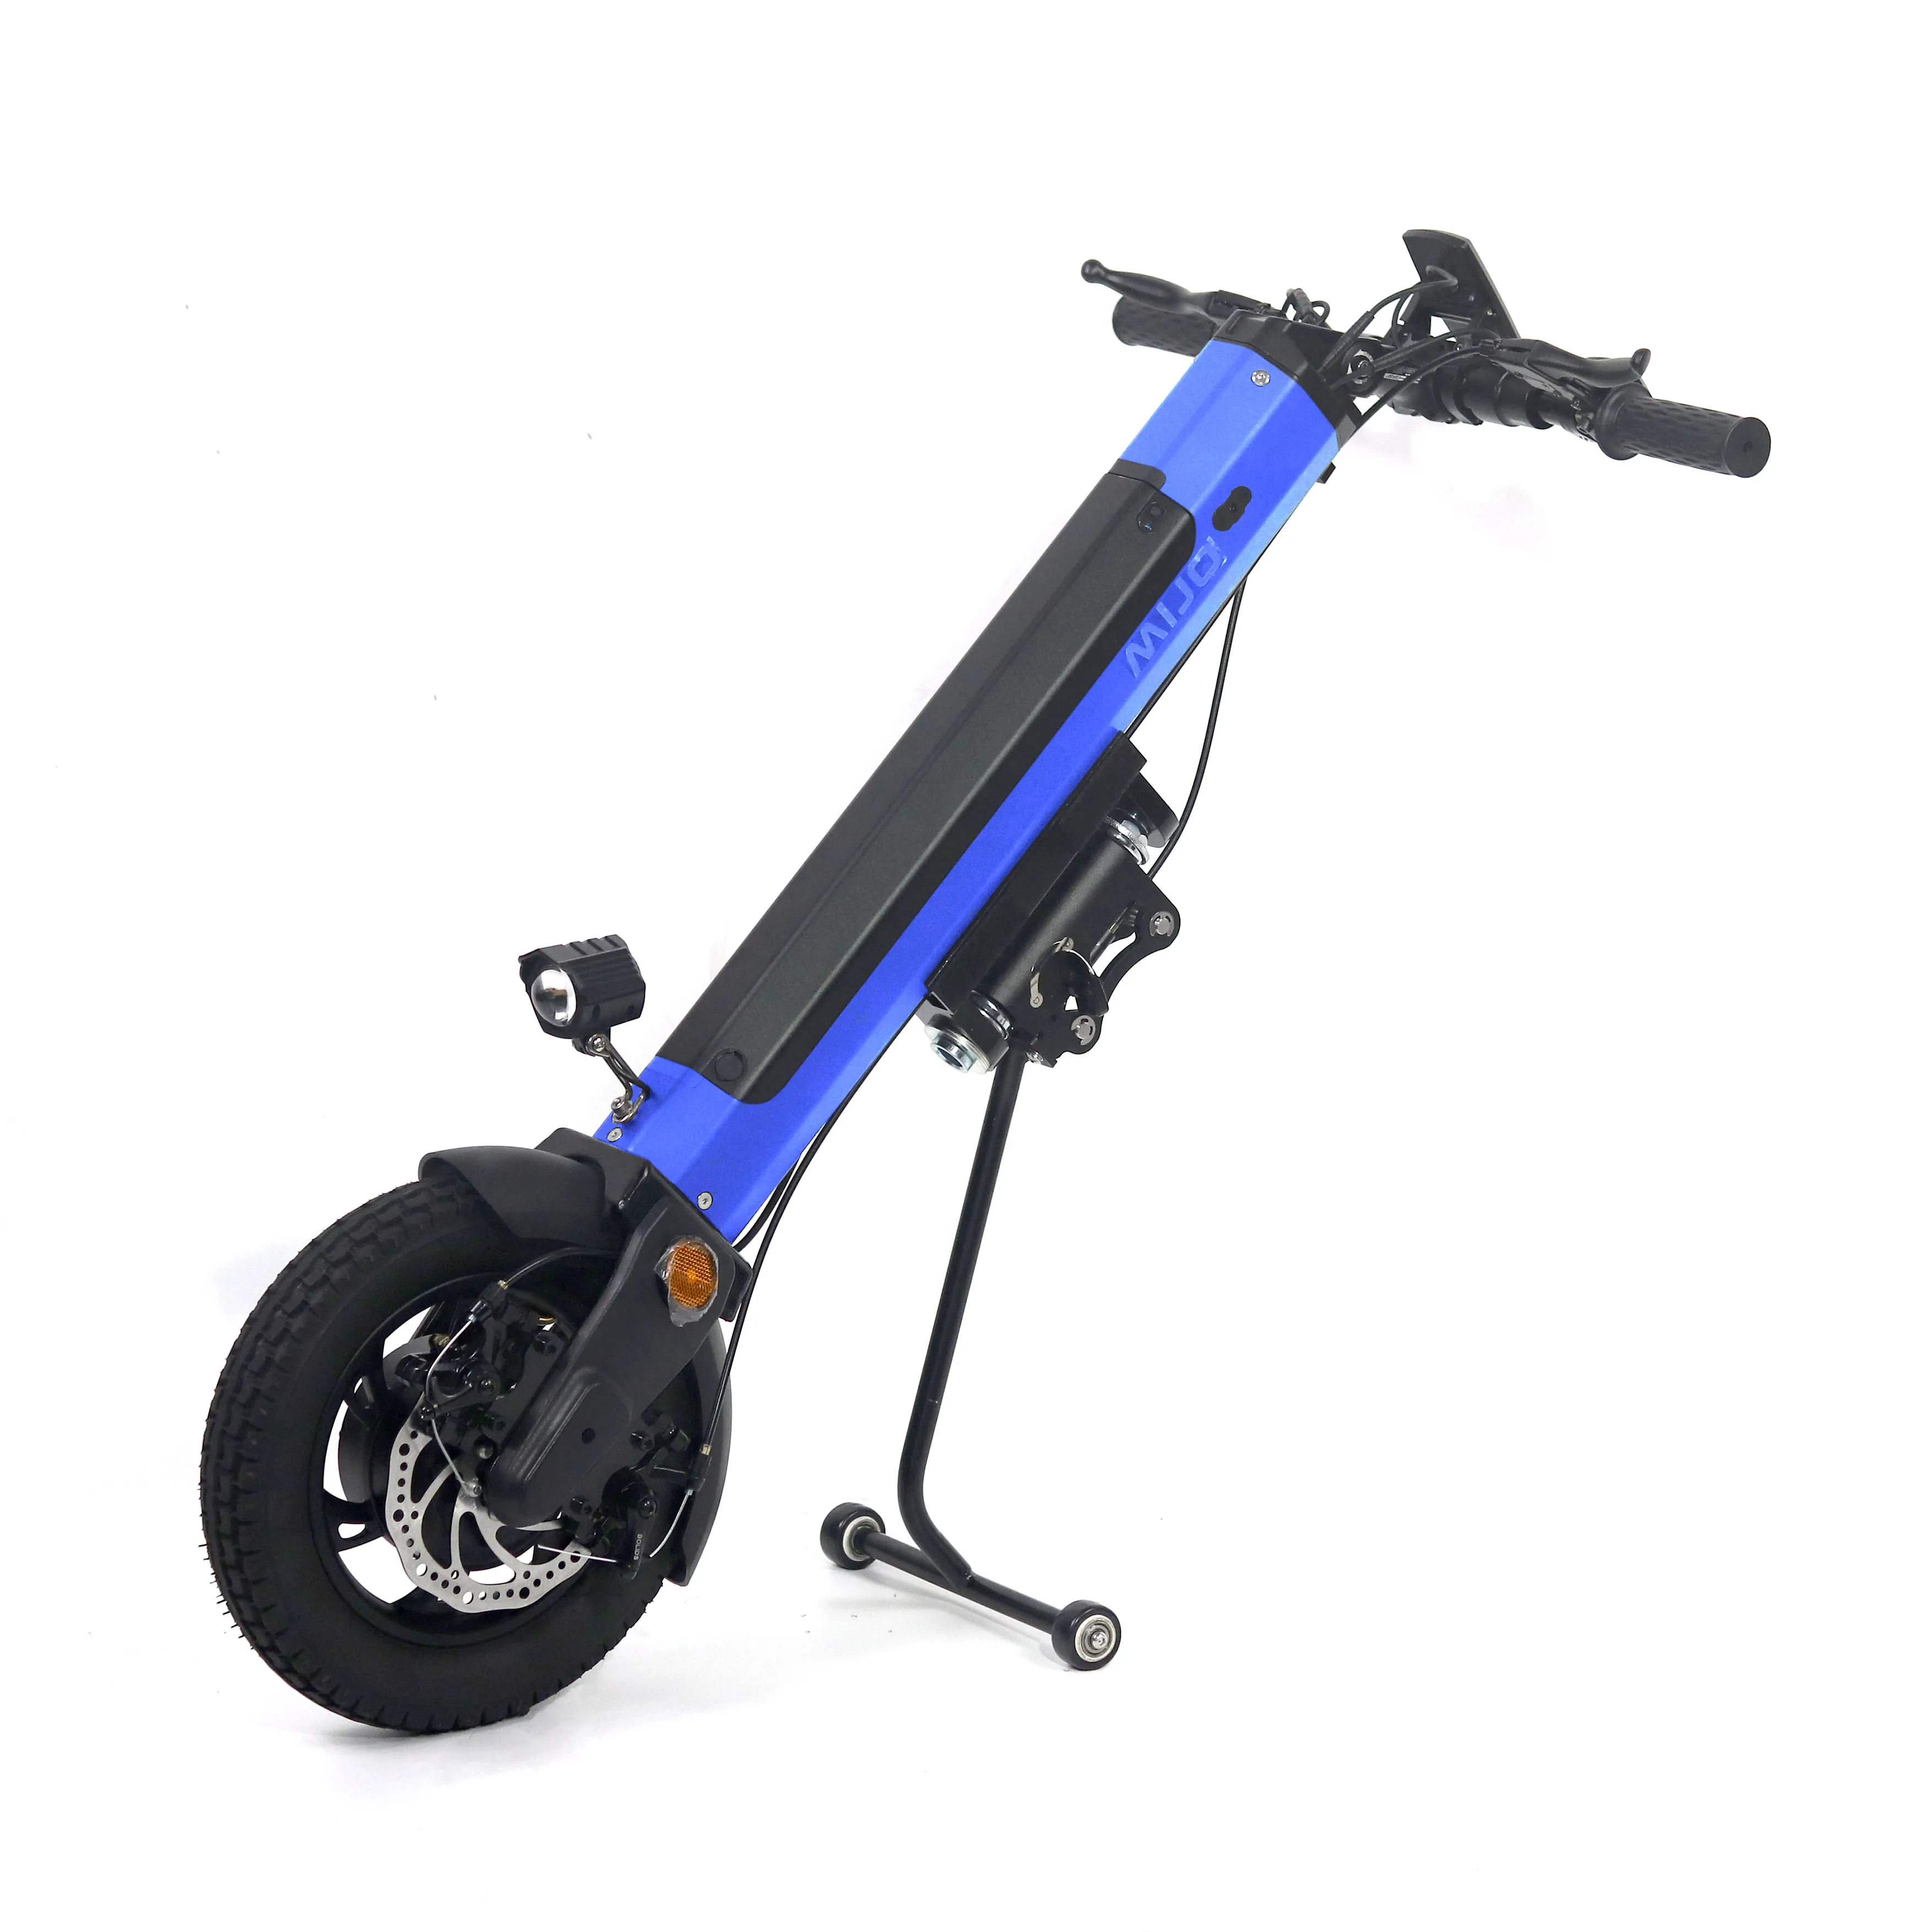 Portable and Comfortable Electric Handcycle Wheelchair Attachment 350W Wheelchair Drive Head with 36V 13Ah Lithium battery powerful handbike for wheelchair drive power systems 36v 350w 12 inch 13ah battery